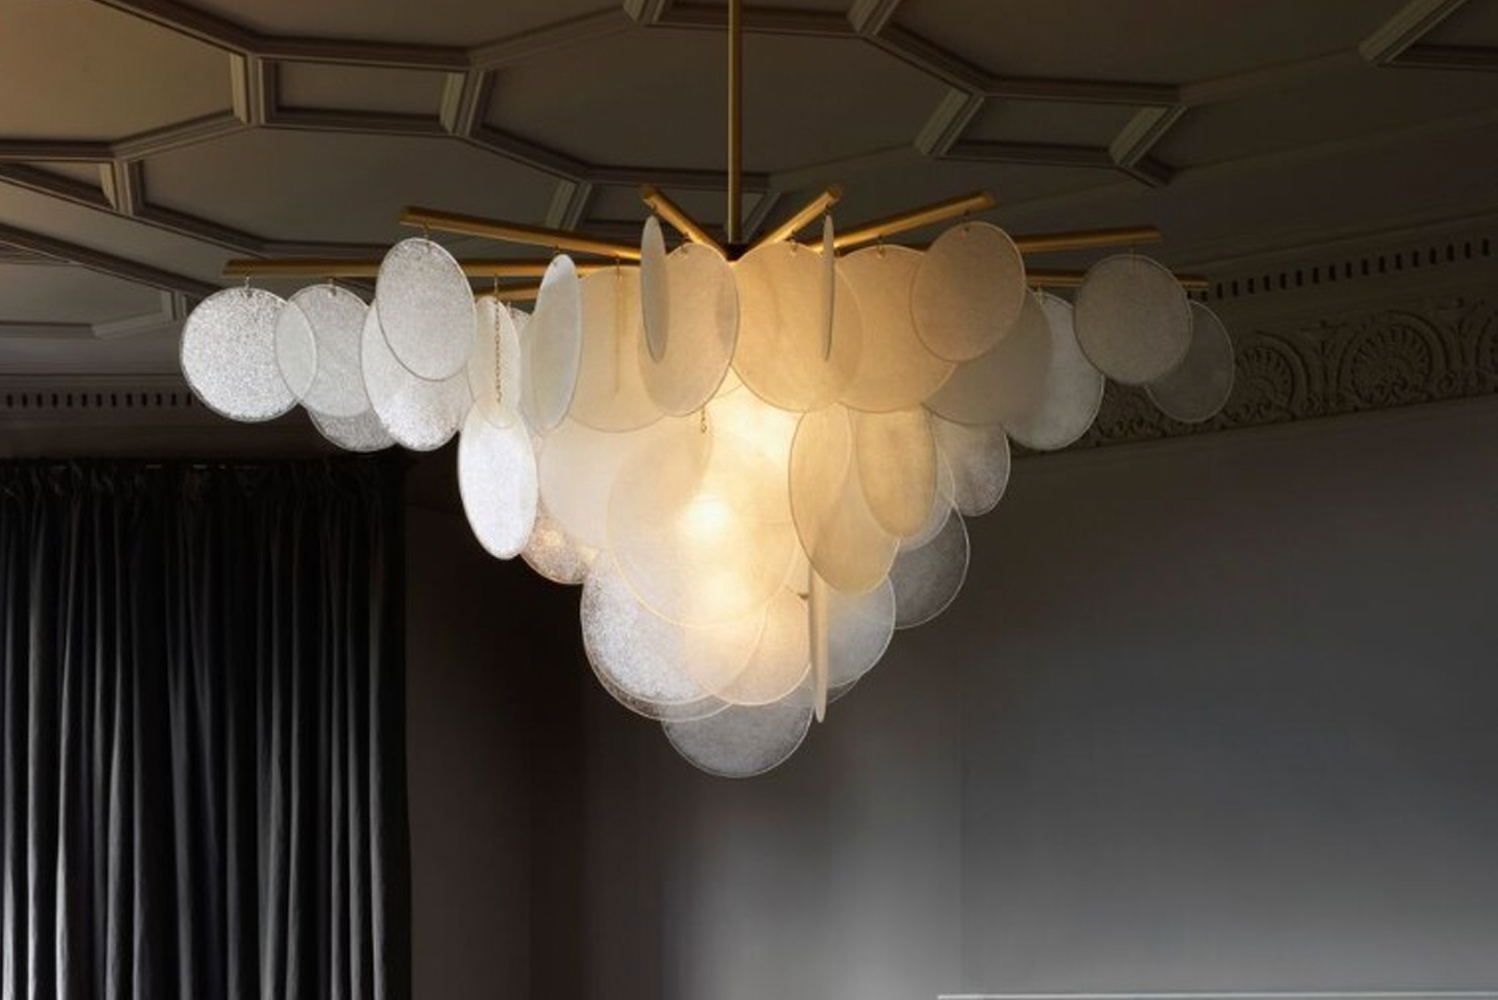 CTO Lighting launched Nimbus which is available as a pendant and wall light 